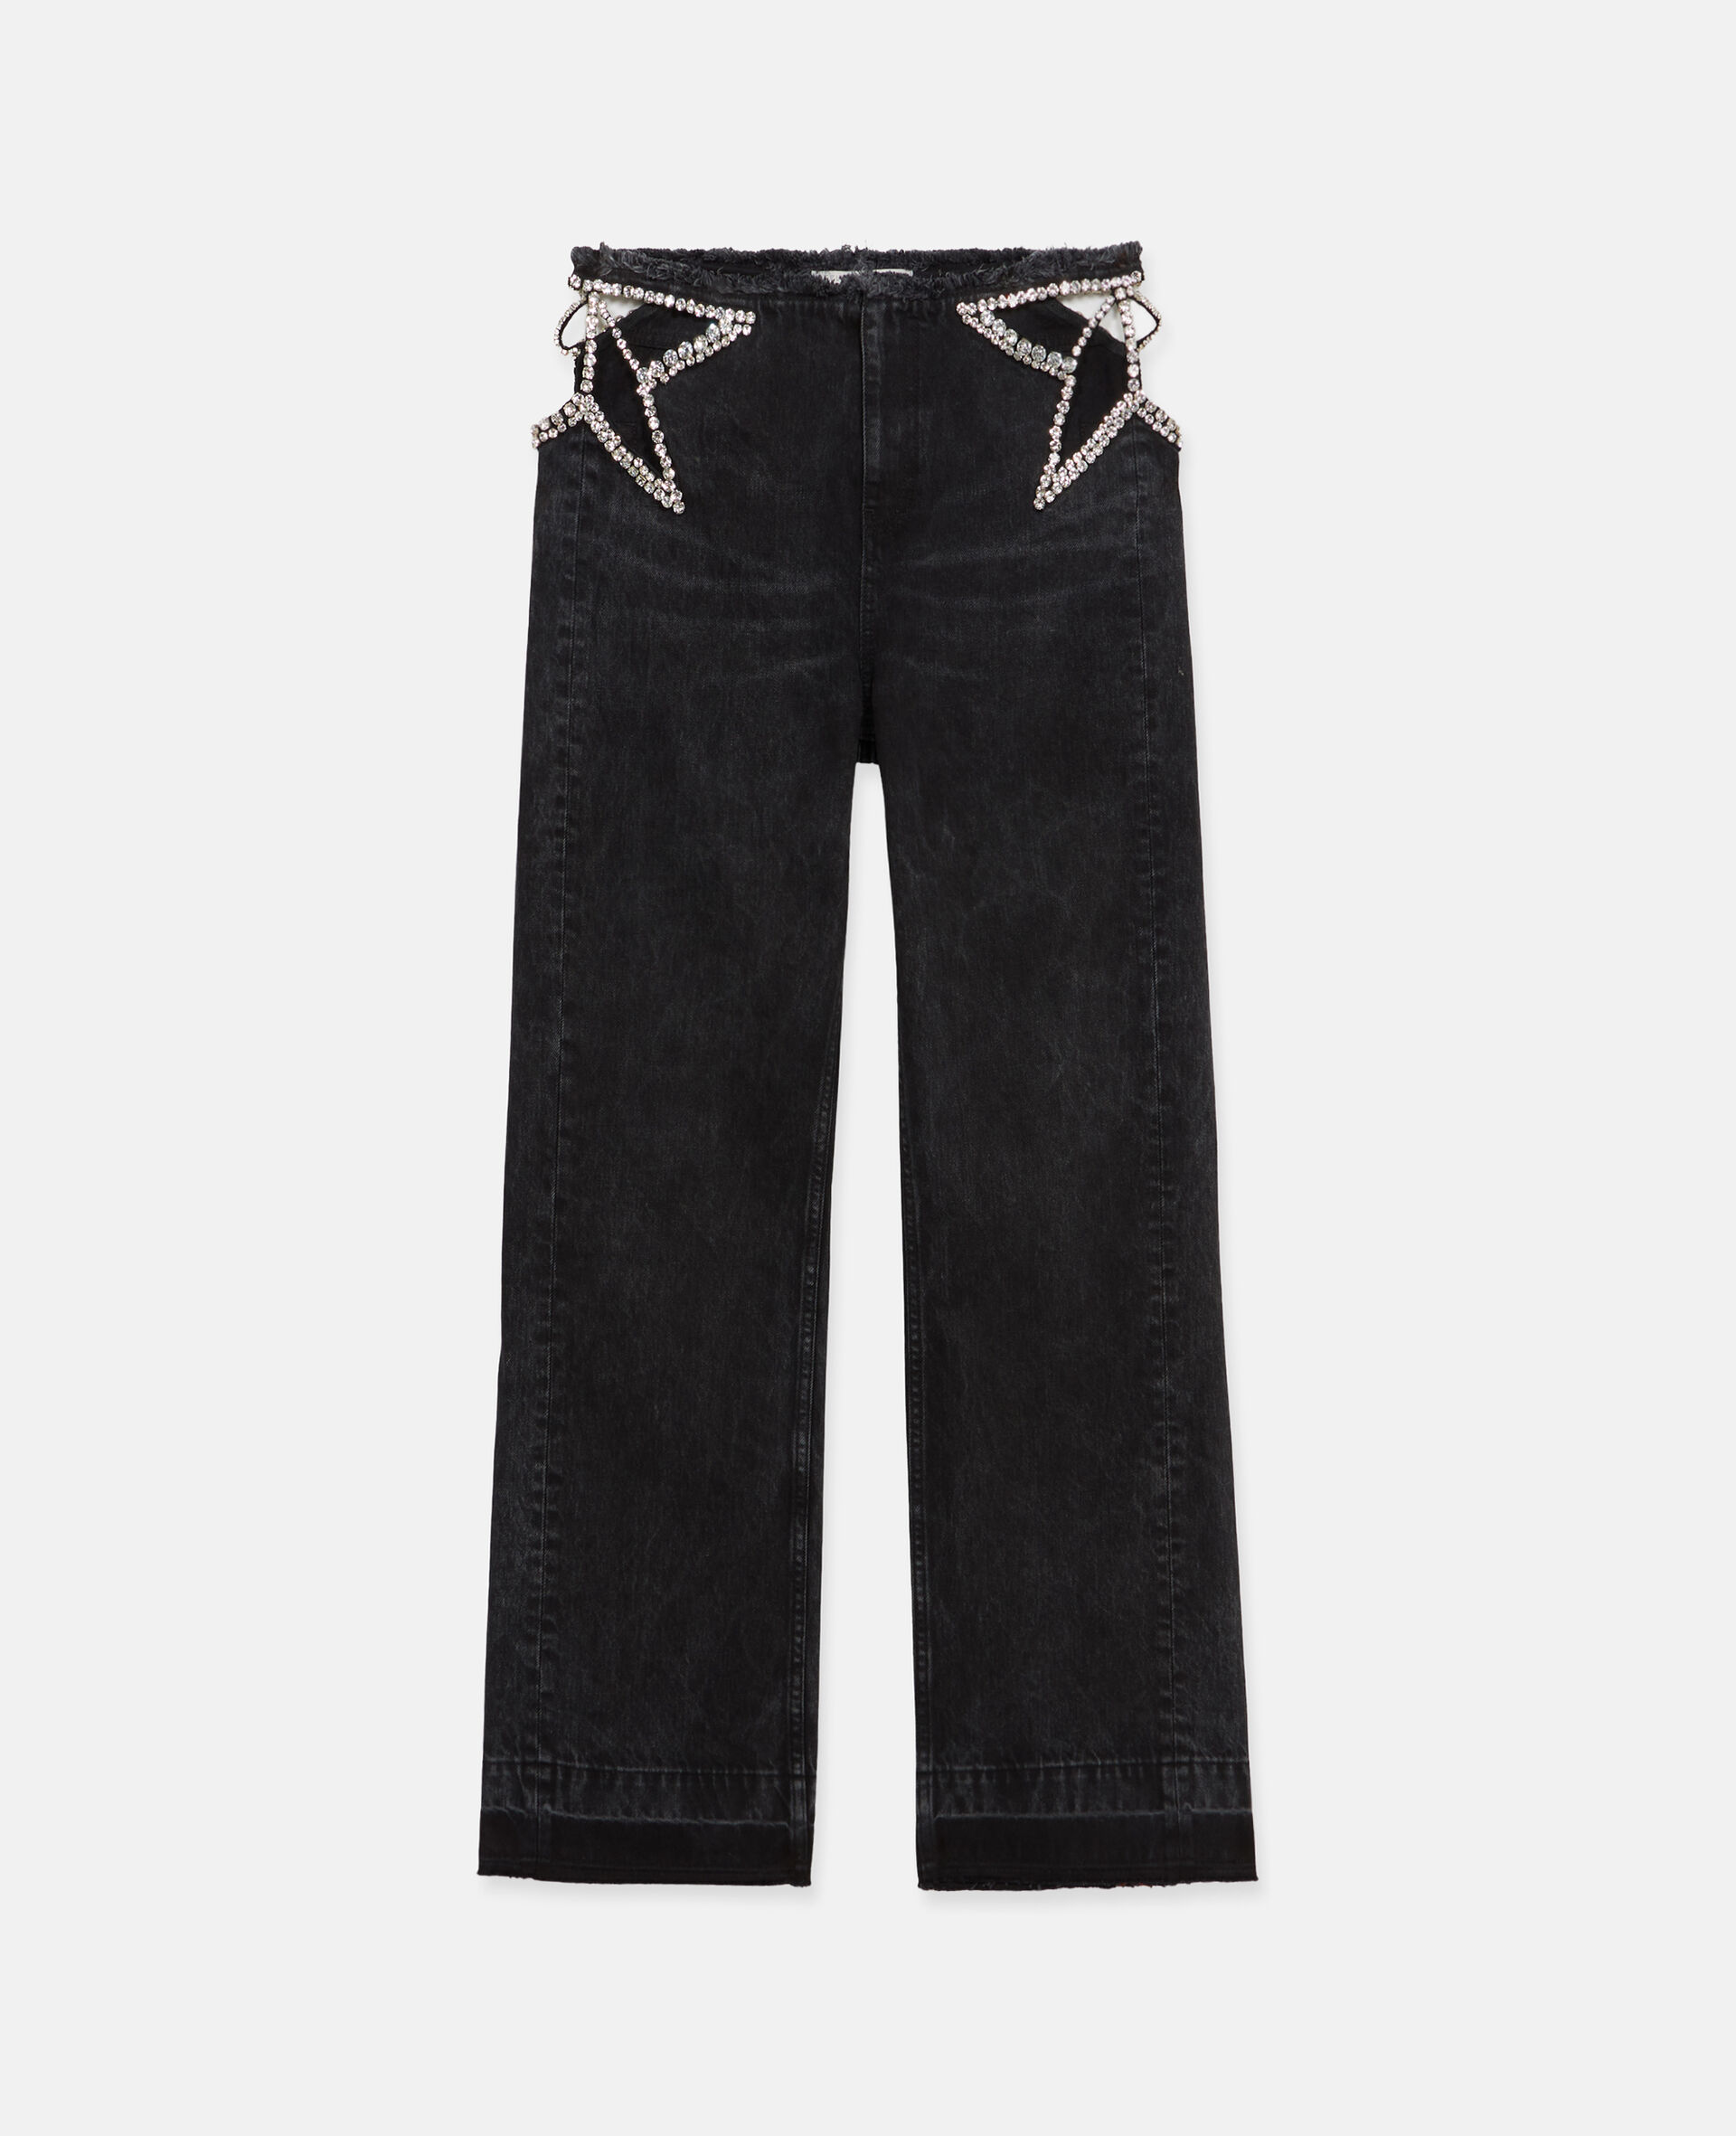 Star Cut-Out Low-Rise jeans-Black-large image number 0